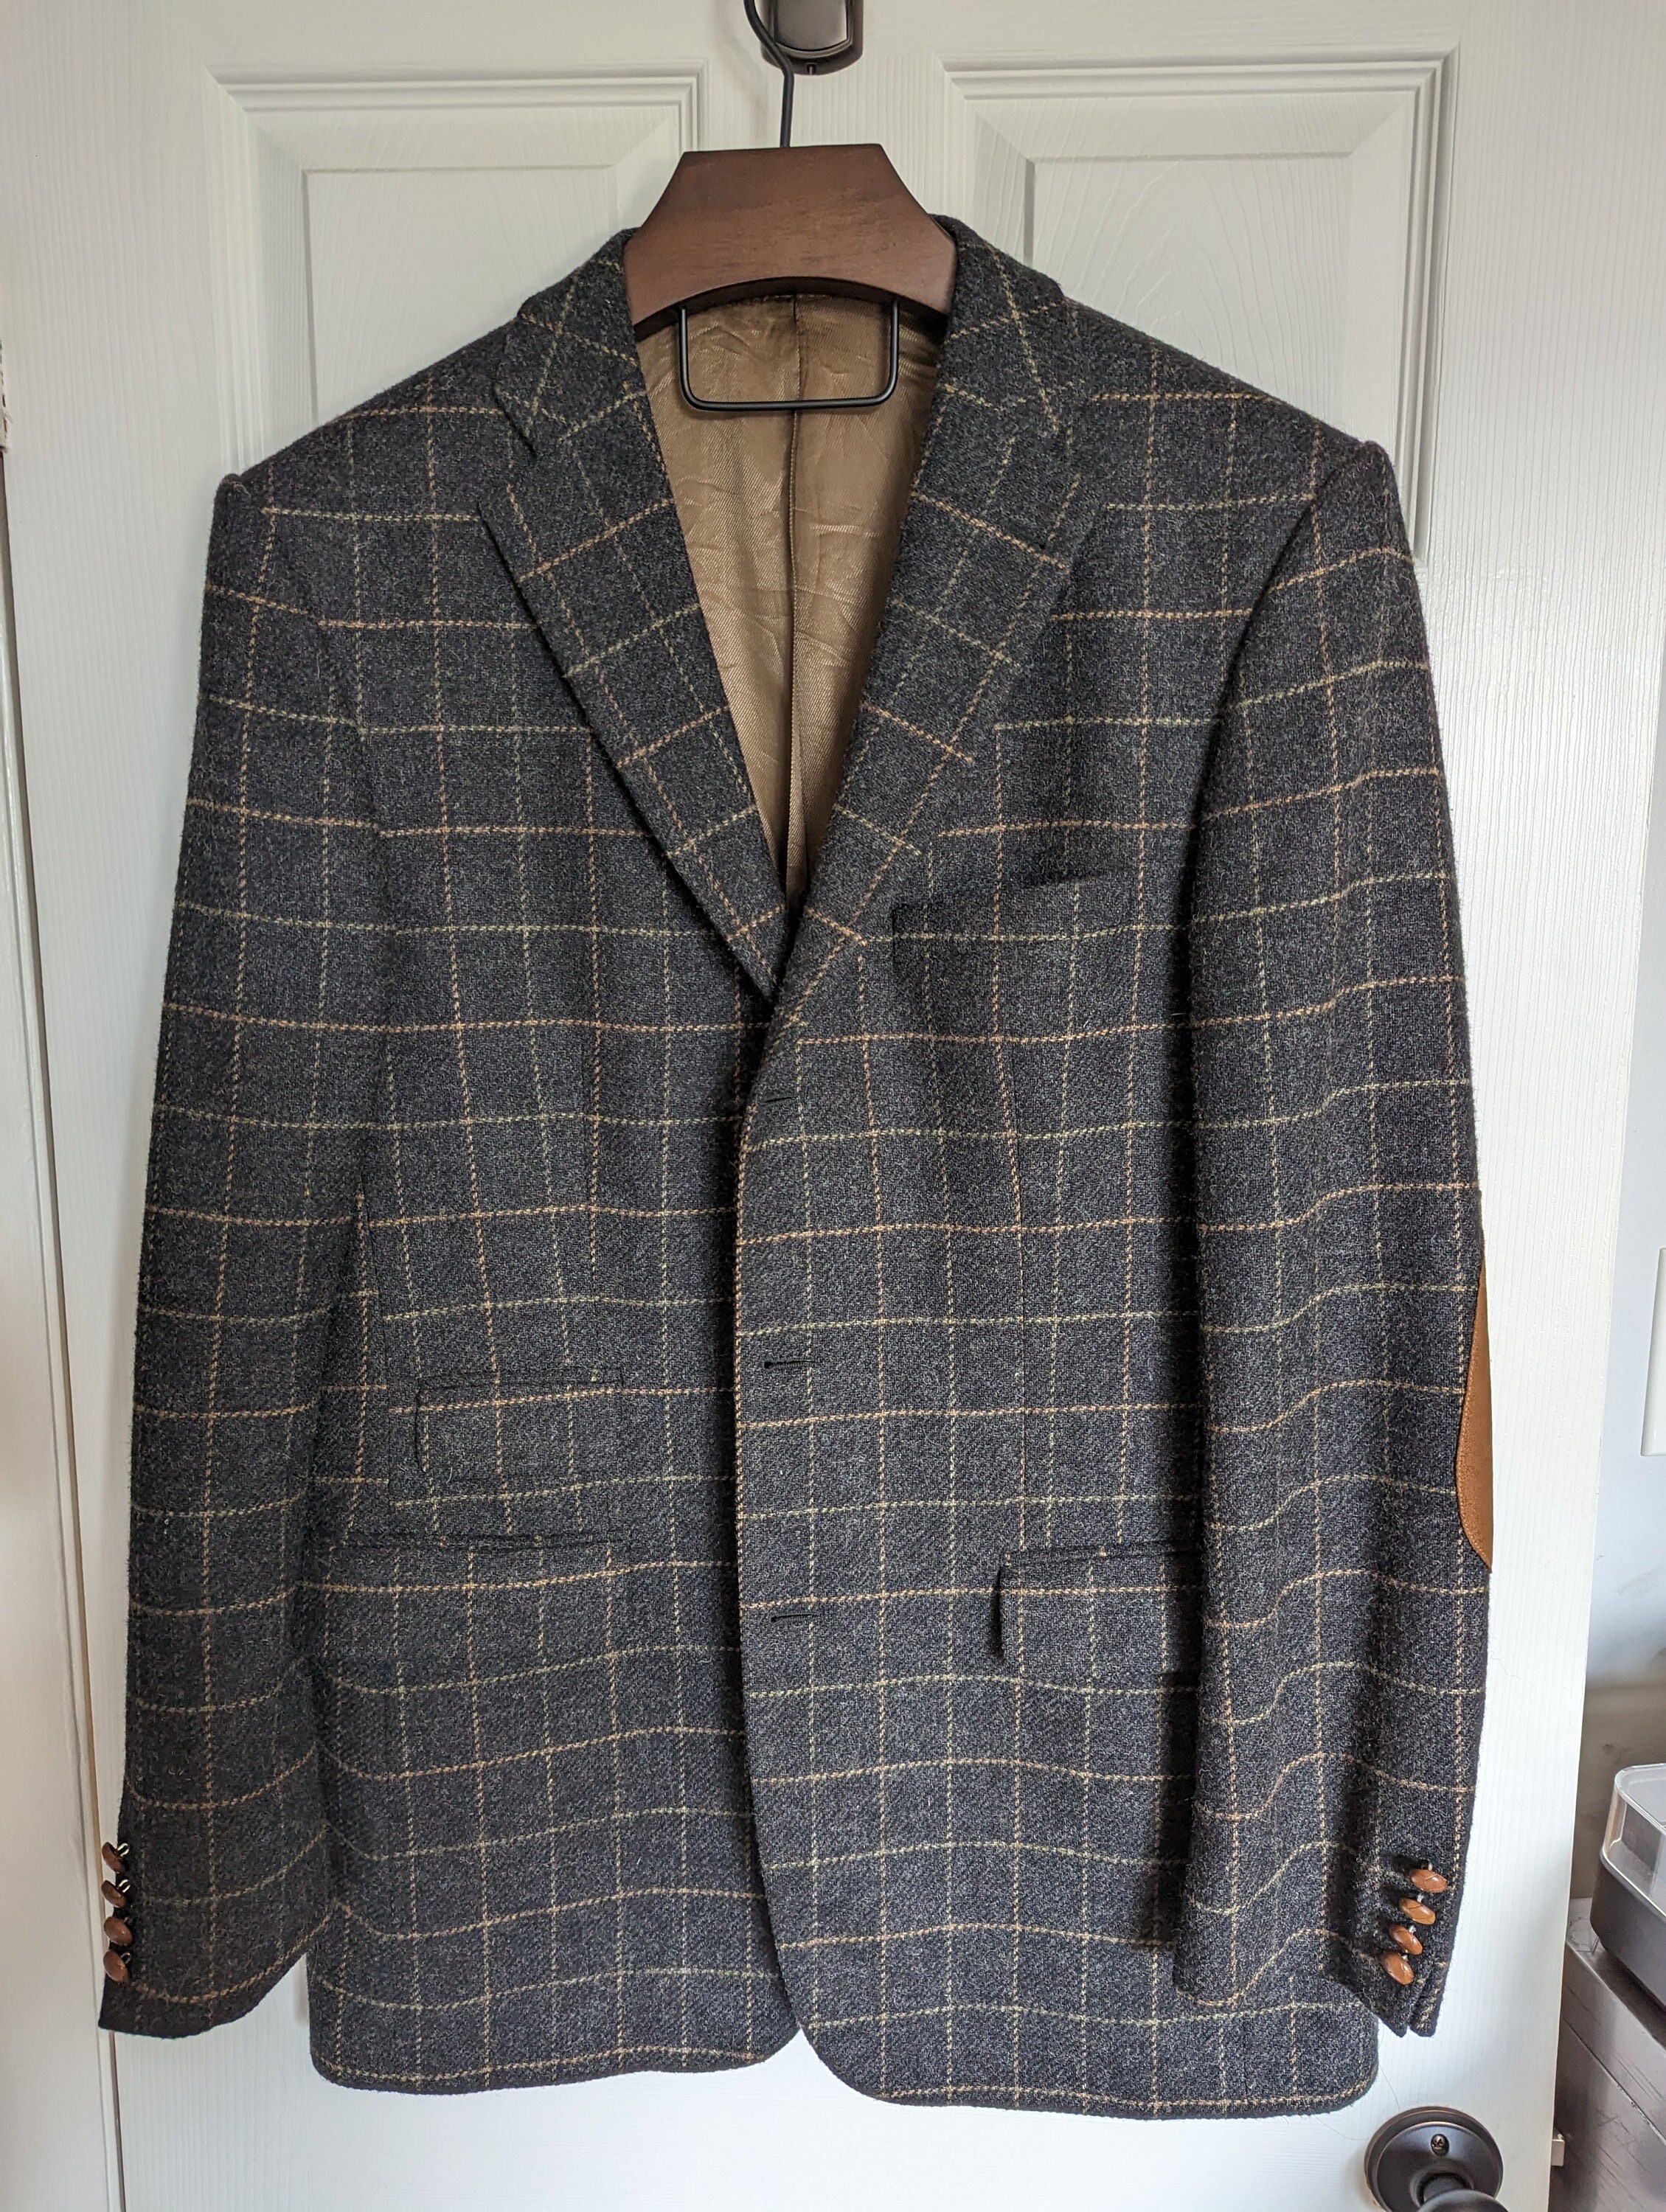 What is the purpose of the elbow patch on tweed professor jackets? - Quora